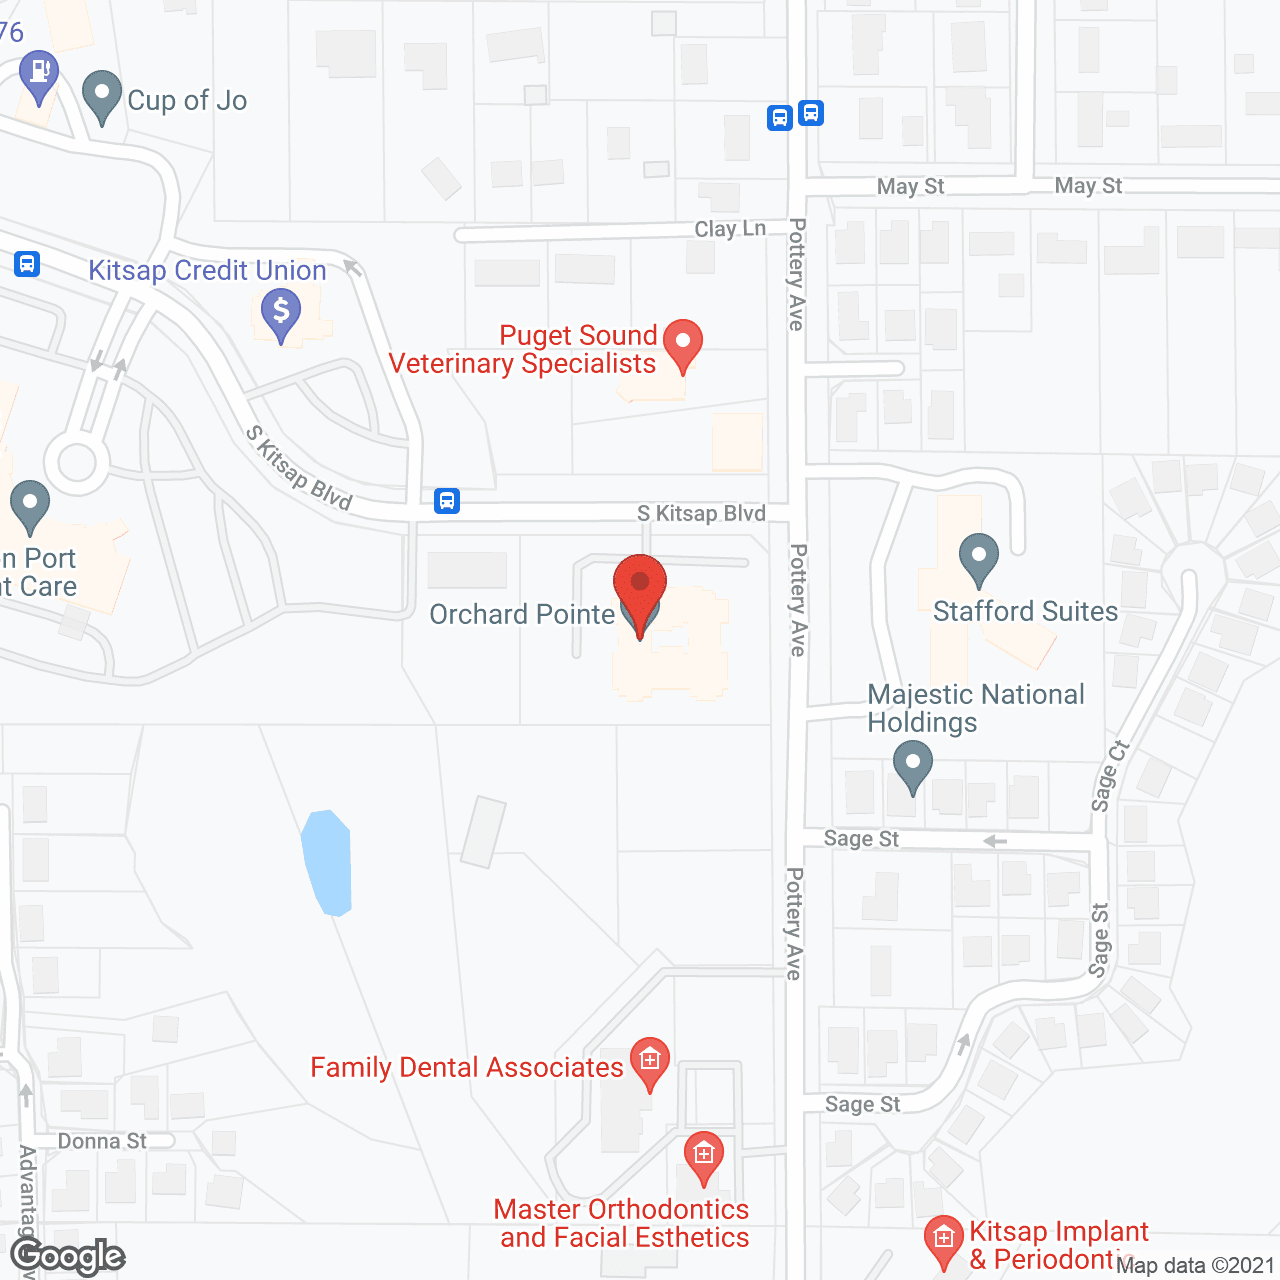 Orchard Pointe in google map